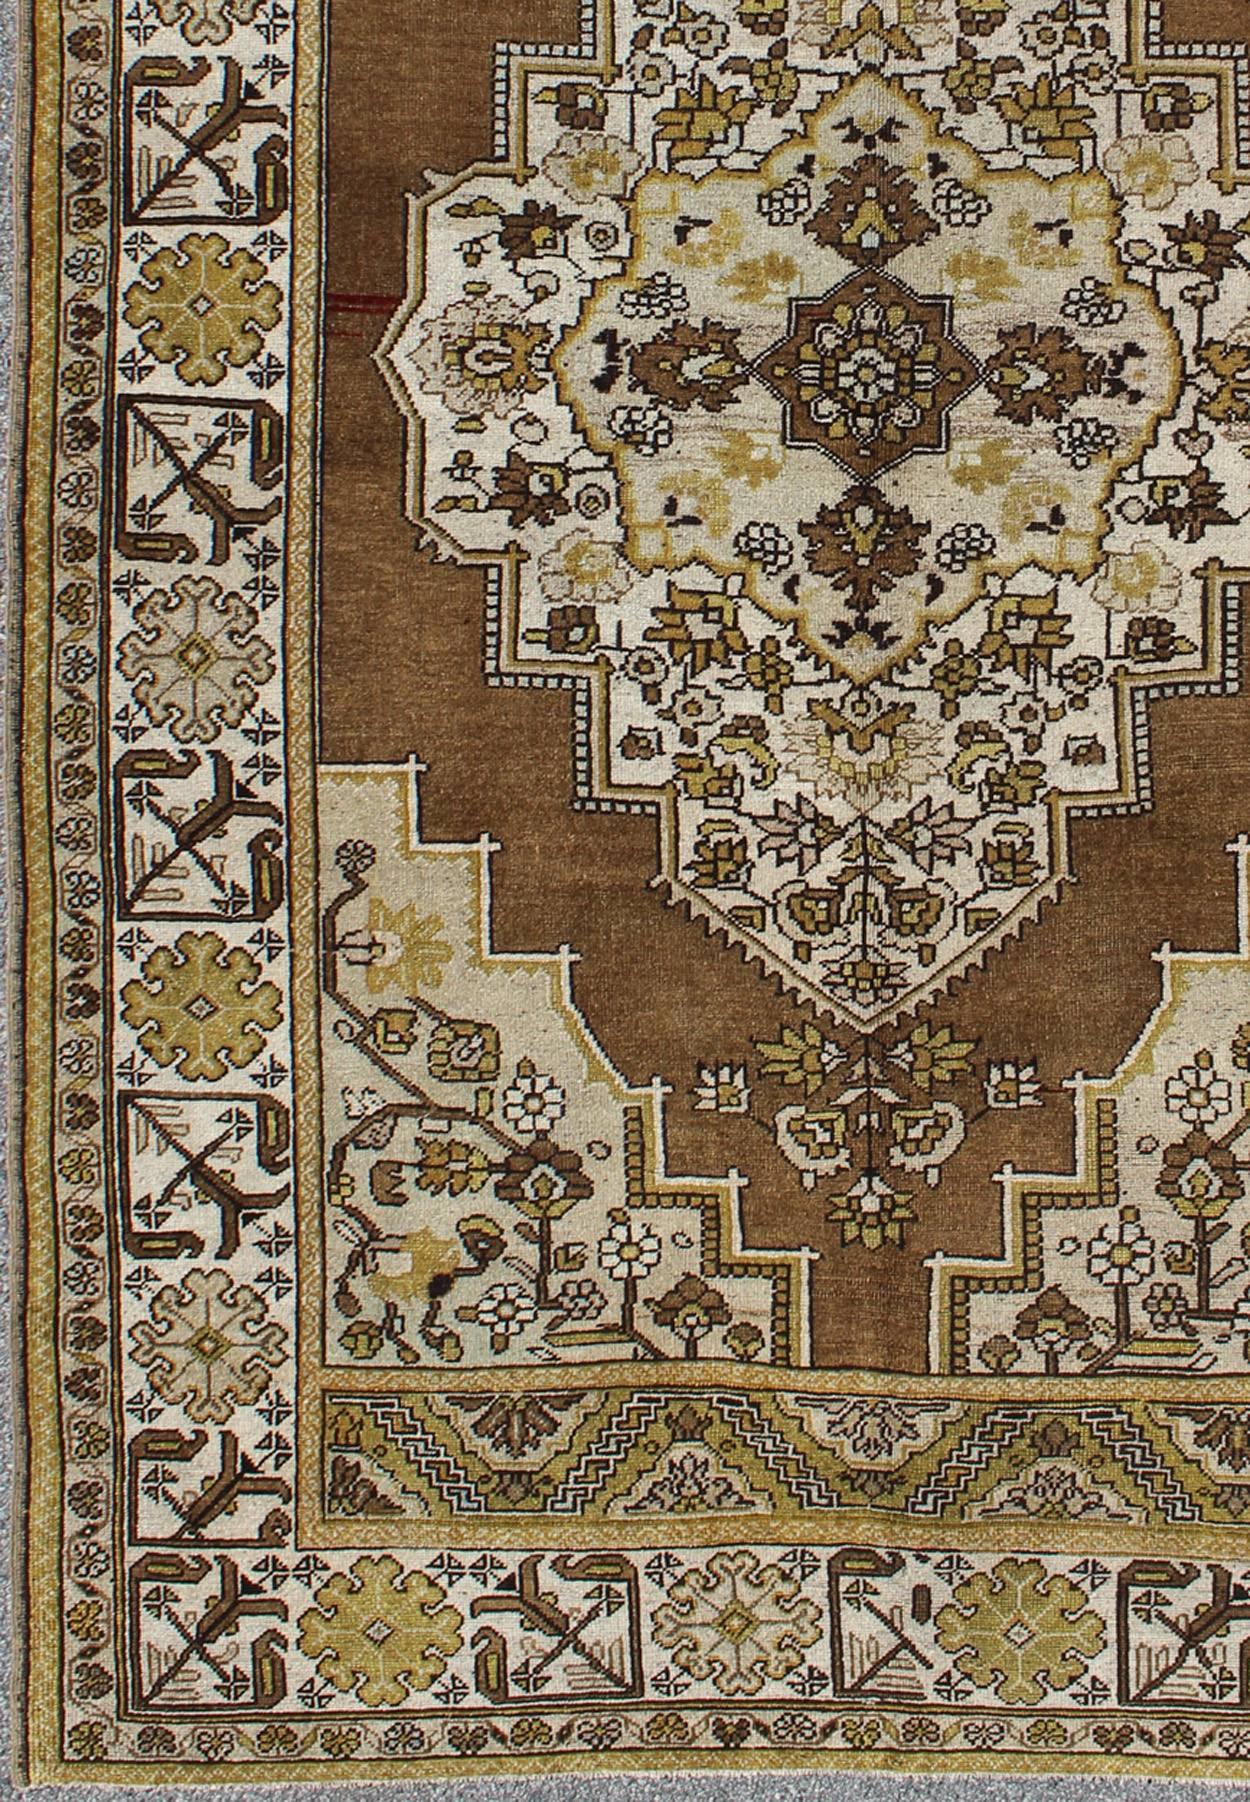 Measures: 6'4 x 9'11.
This vintage, midcentury Turkish Oushak rug features an intricately beautiful design with a floral aesthetic. The central medallion is surrounded by multi-layers in the central field. The various shades of mocha brown and